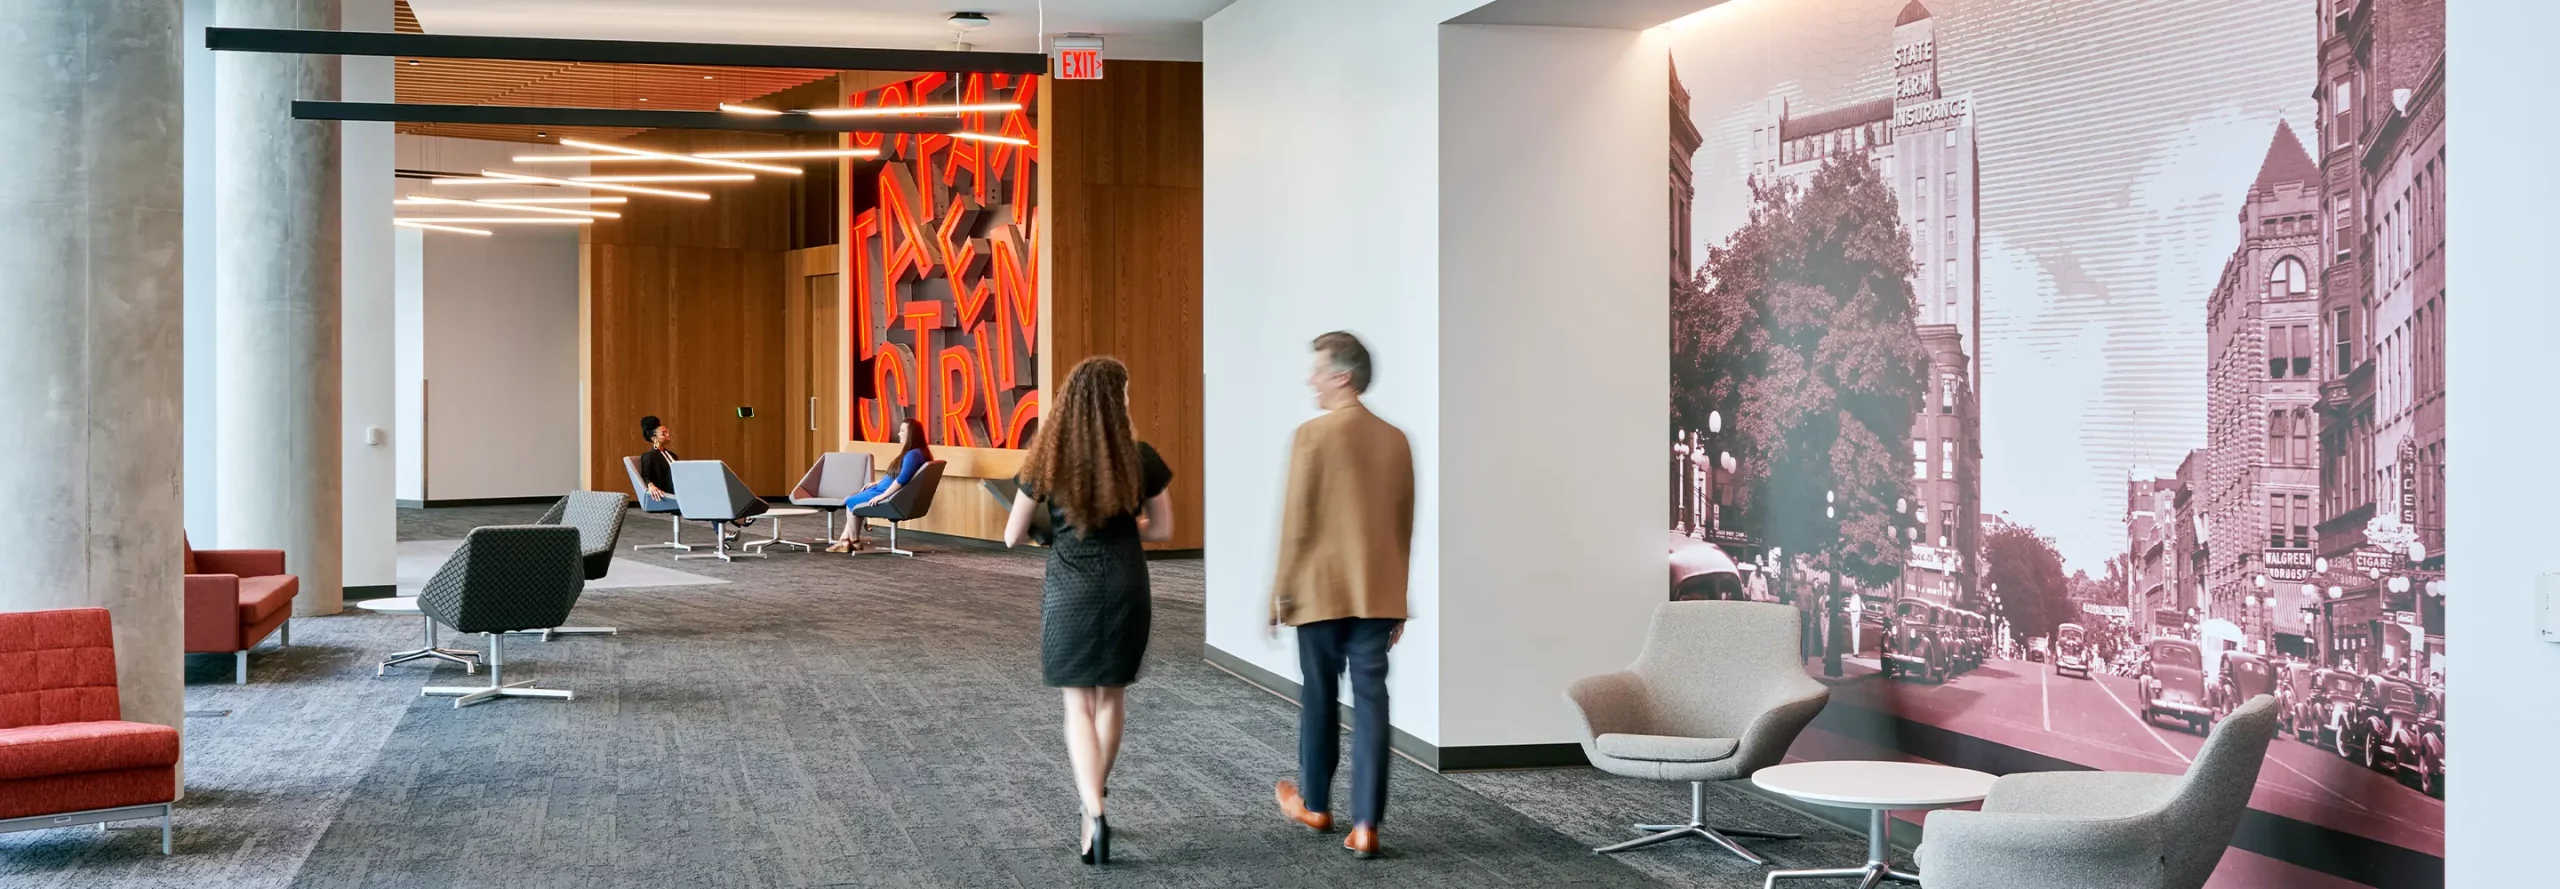 State Farm Corporate Campus, Office Interiors and Experiential Graphics